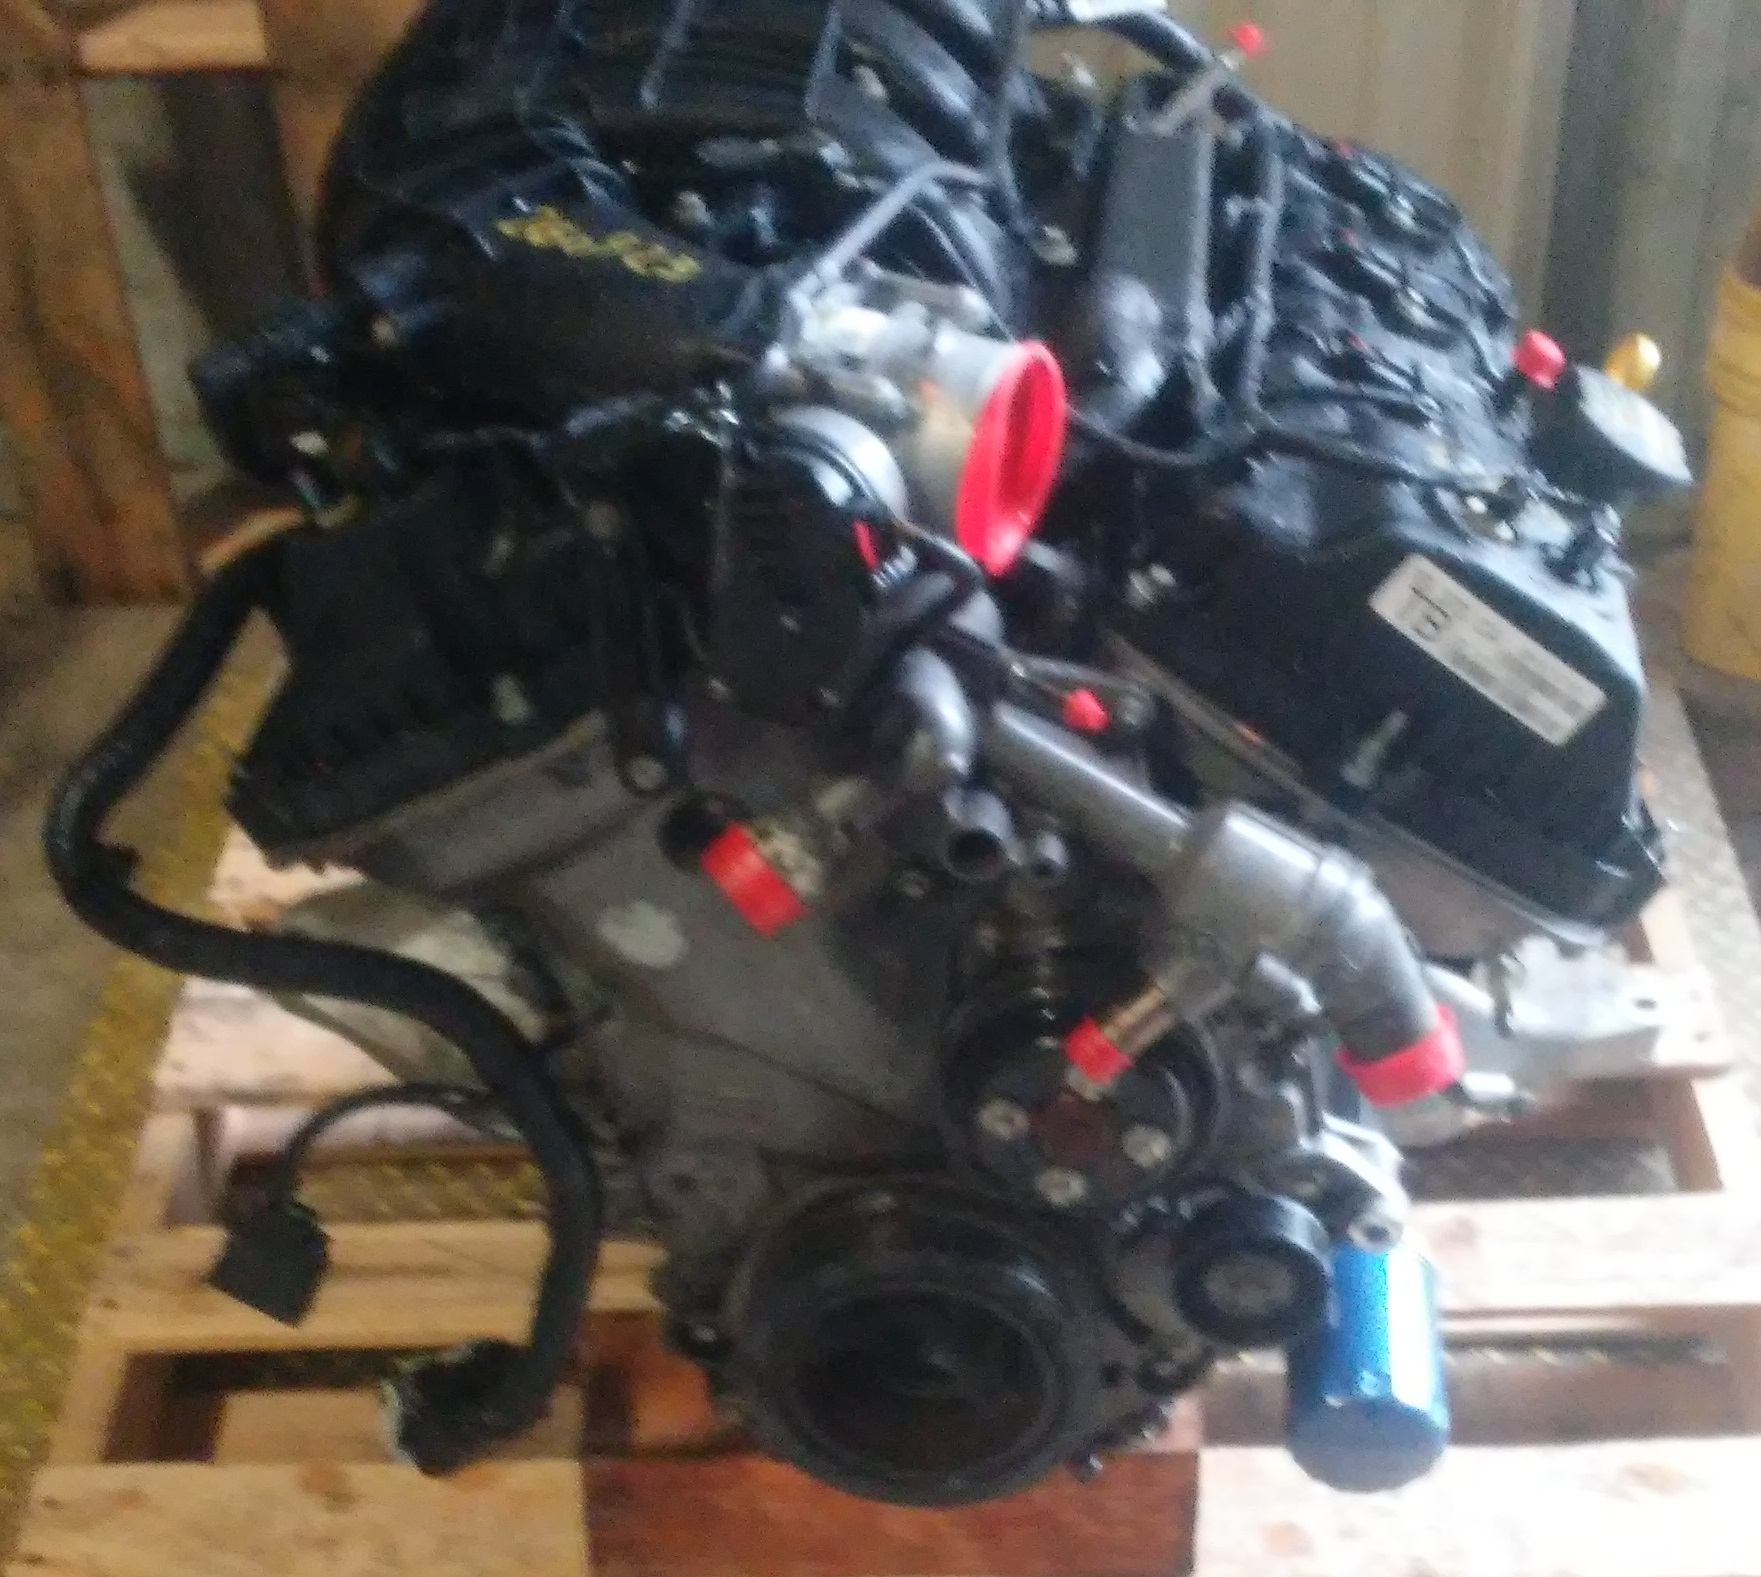 Ford Mustang Engine 12 2.13.19